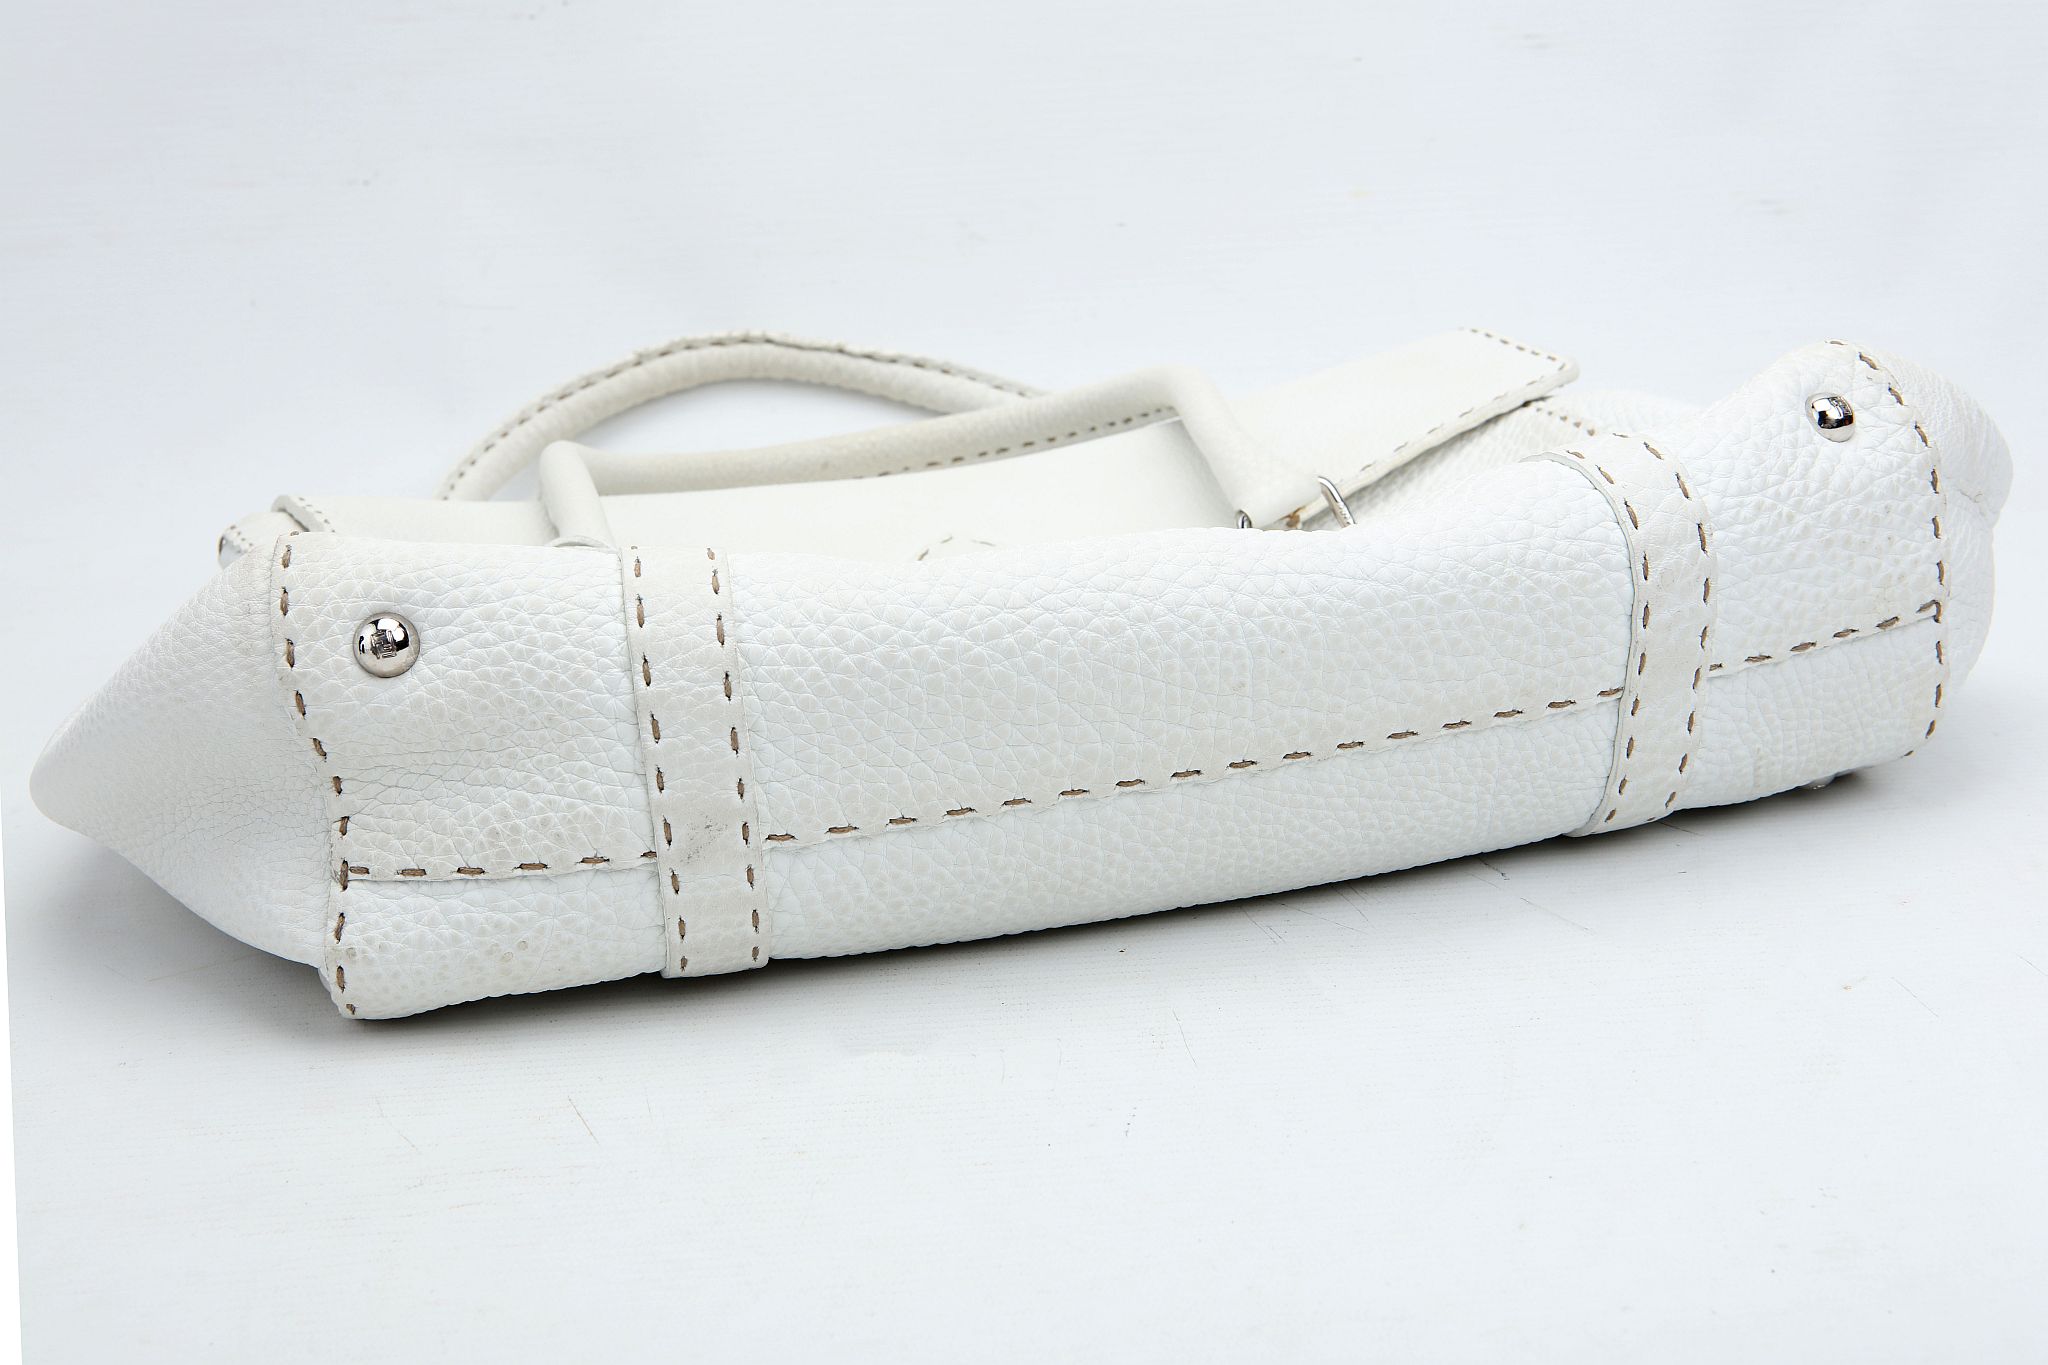 FENDI SELLERIA SHOULDER BAG, white stitched leather with silver tone hardware, 35cm wide, 30cm high, - Image 8 of 12